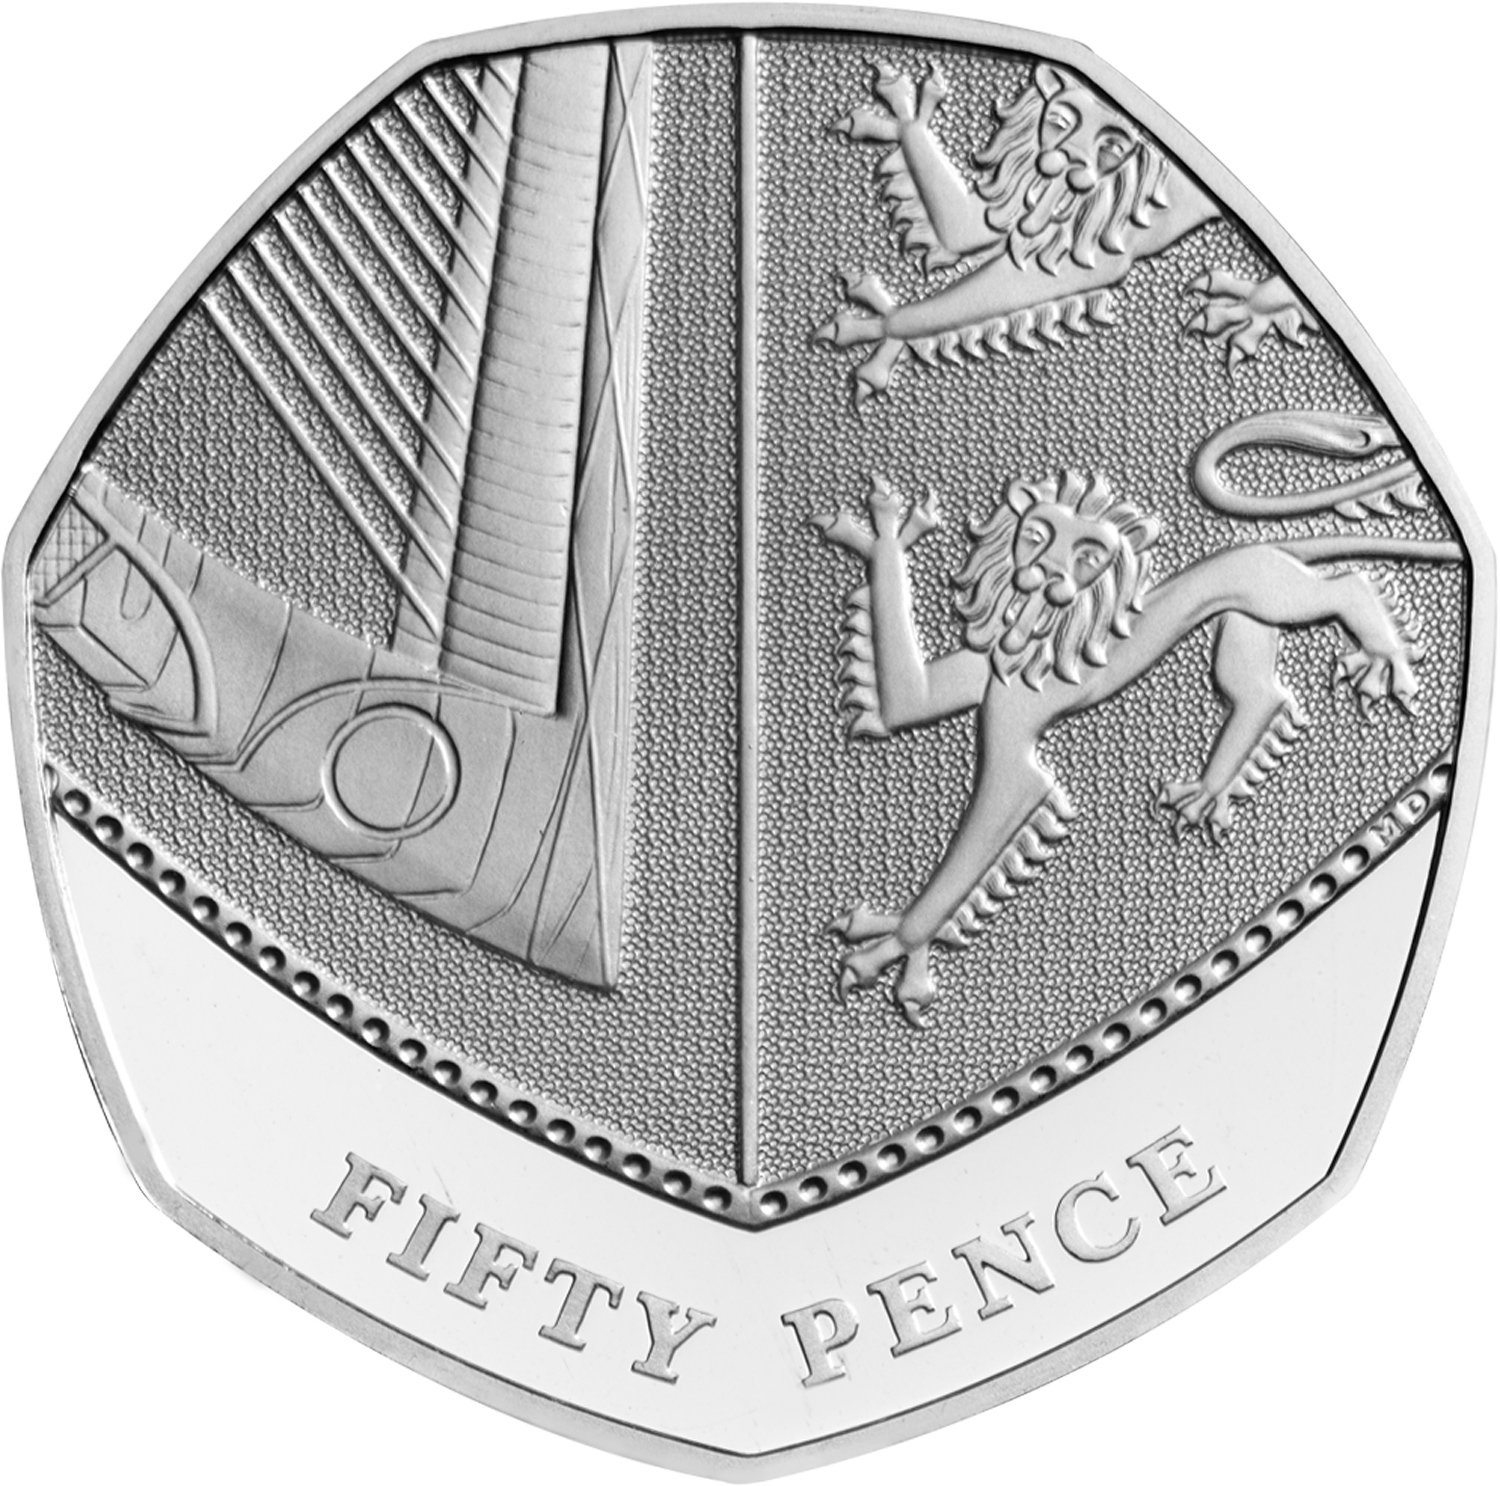 314_coin-designs-and-specifications_50p.jpg